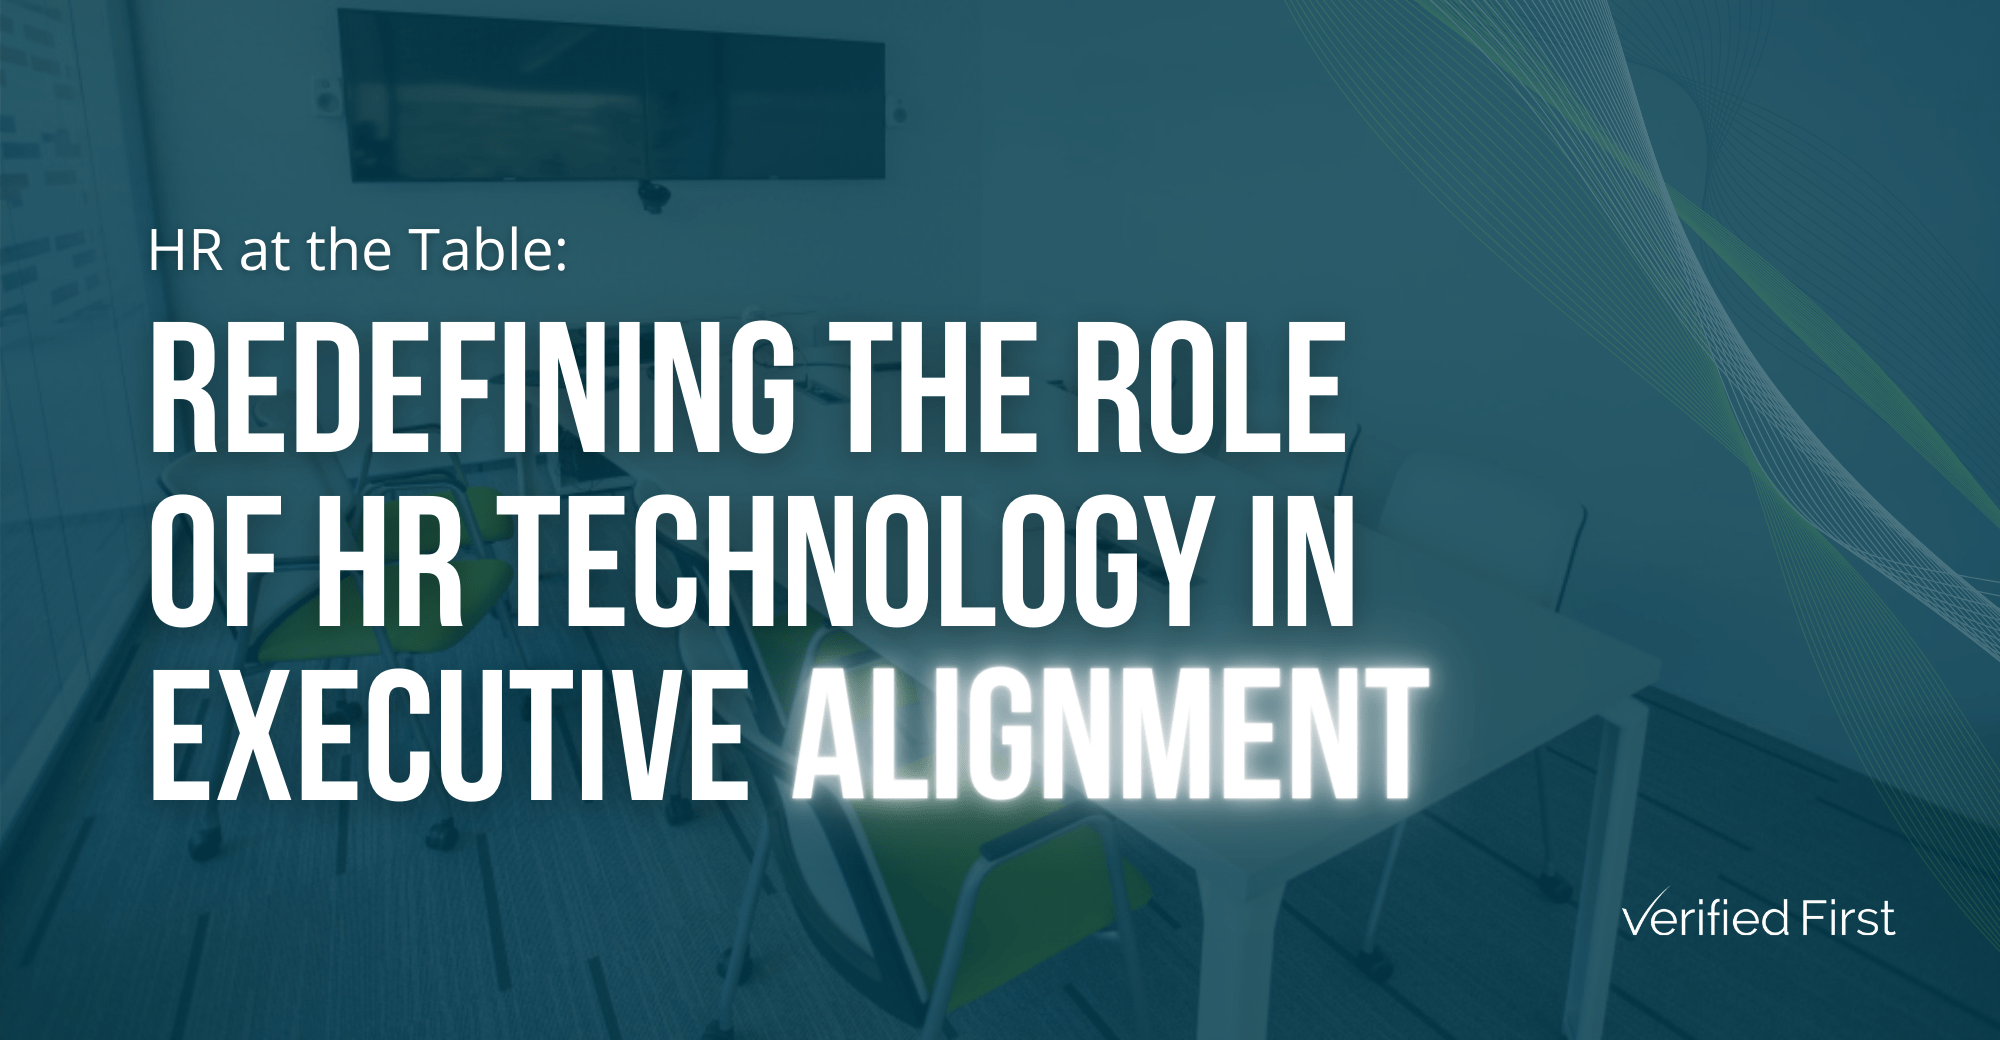 Redefining the Role of HR Technology in Executive Alignment